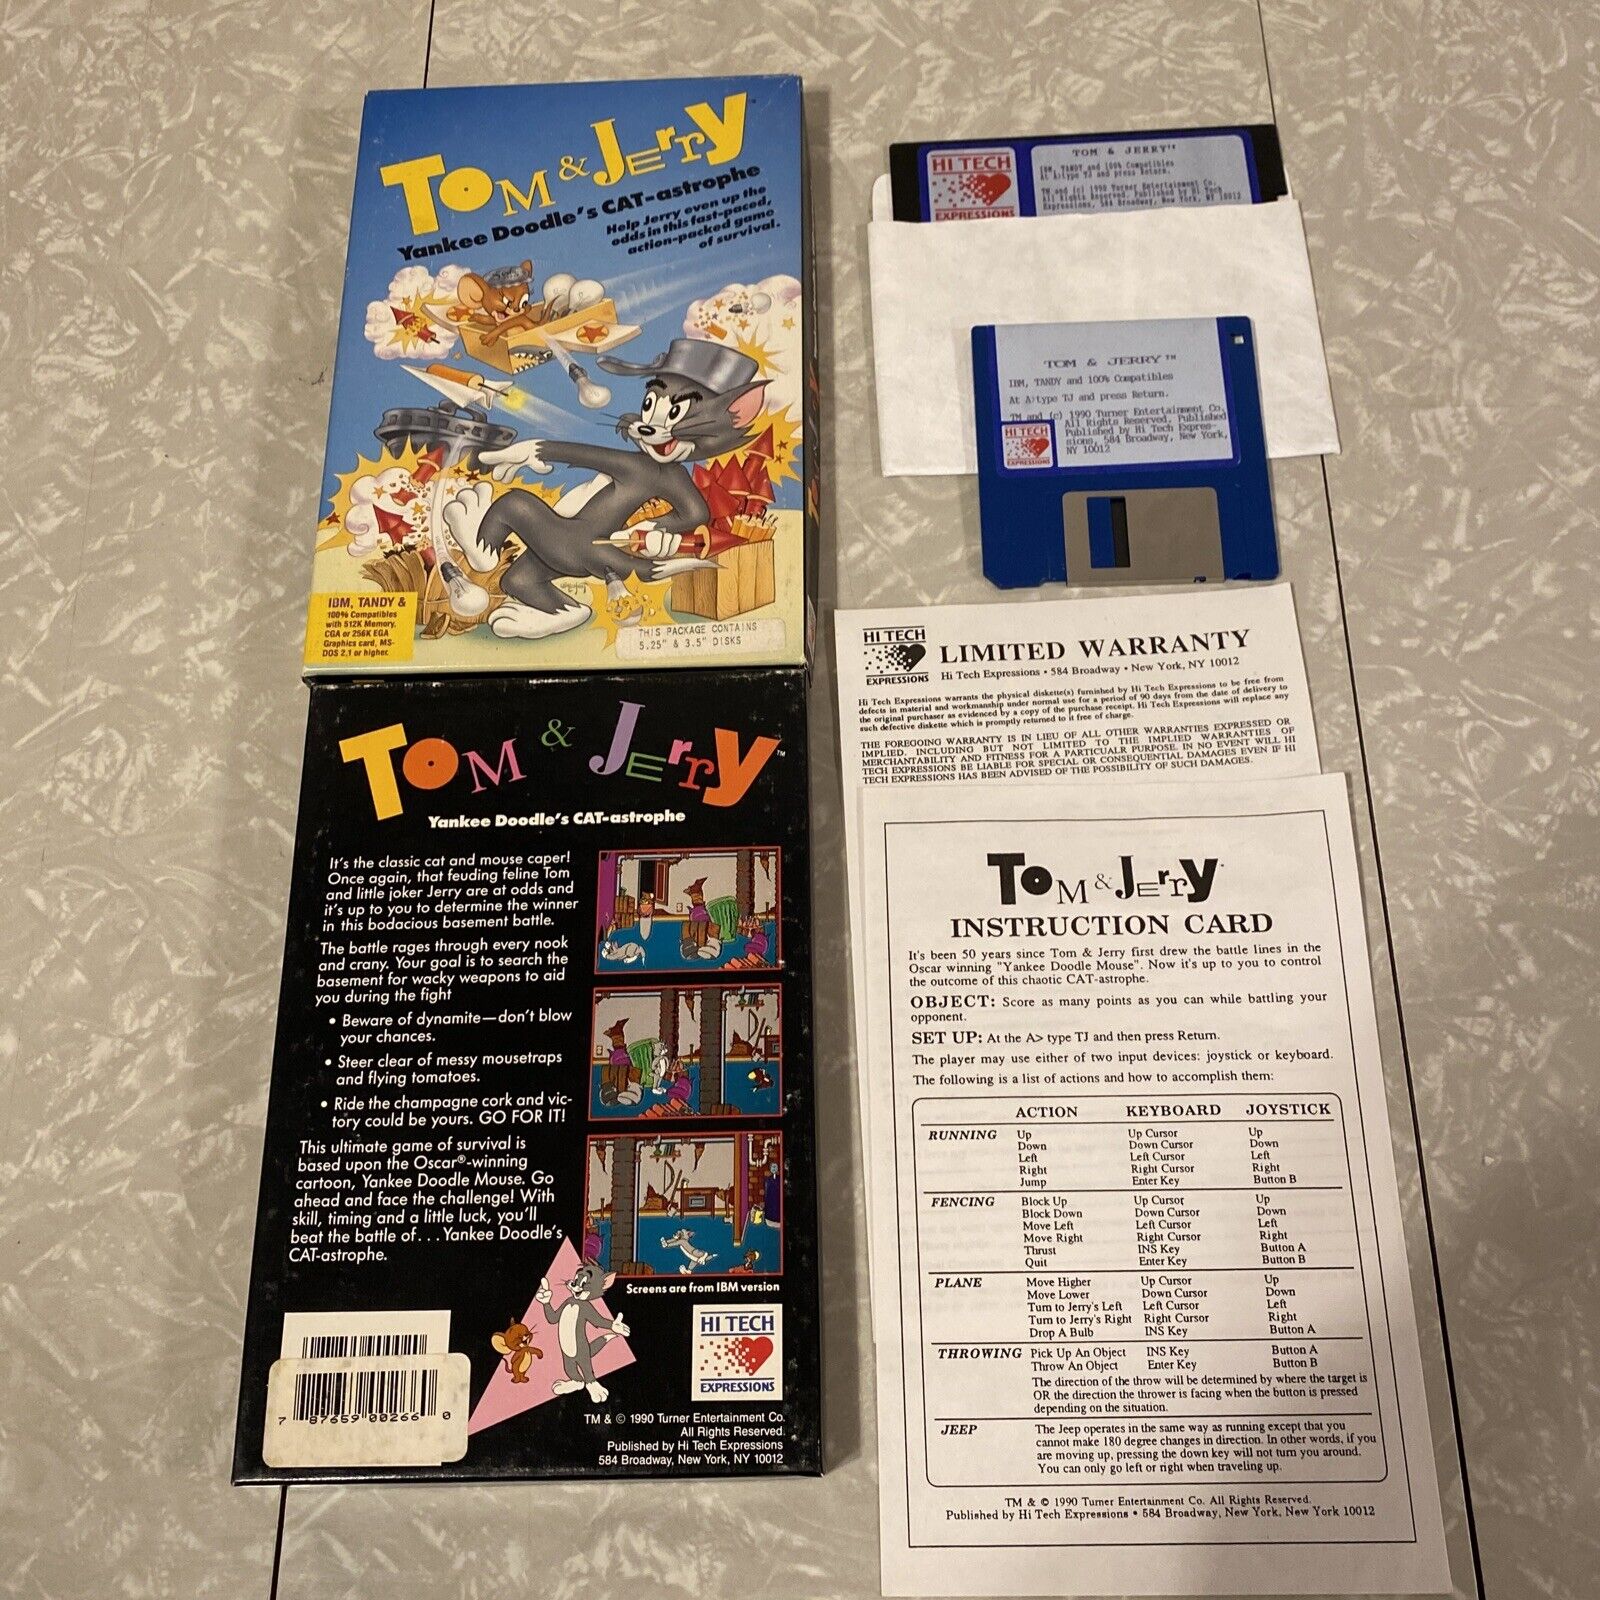 Tom & Jerry Yankee Doodle's Catastrophe IBM Tandy 1990 Rare COMPLETE Hi-Tech